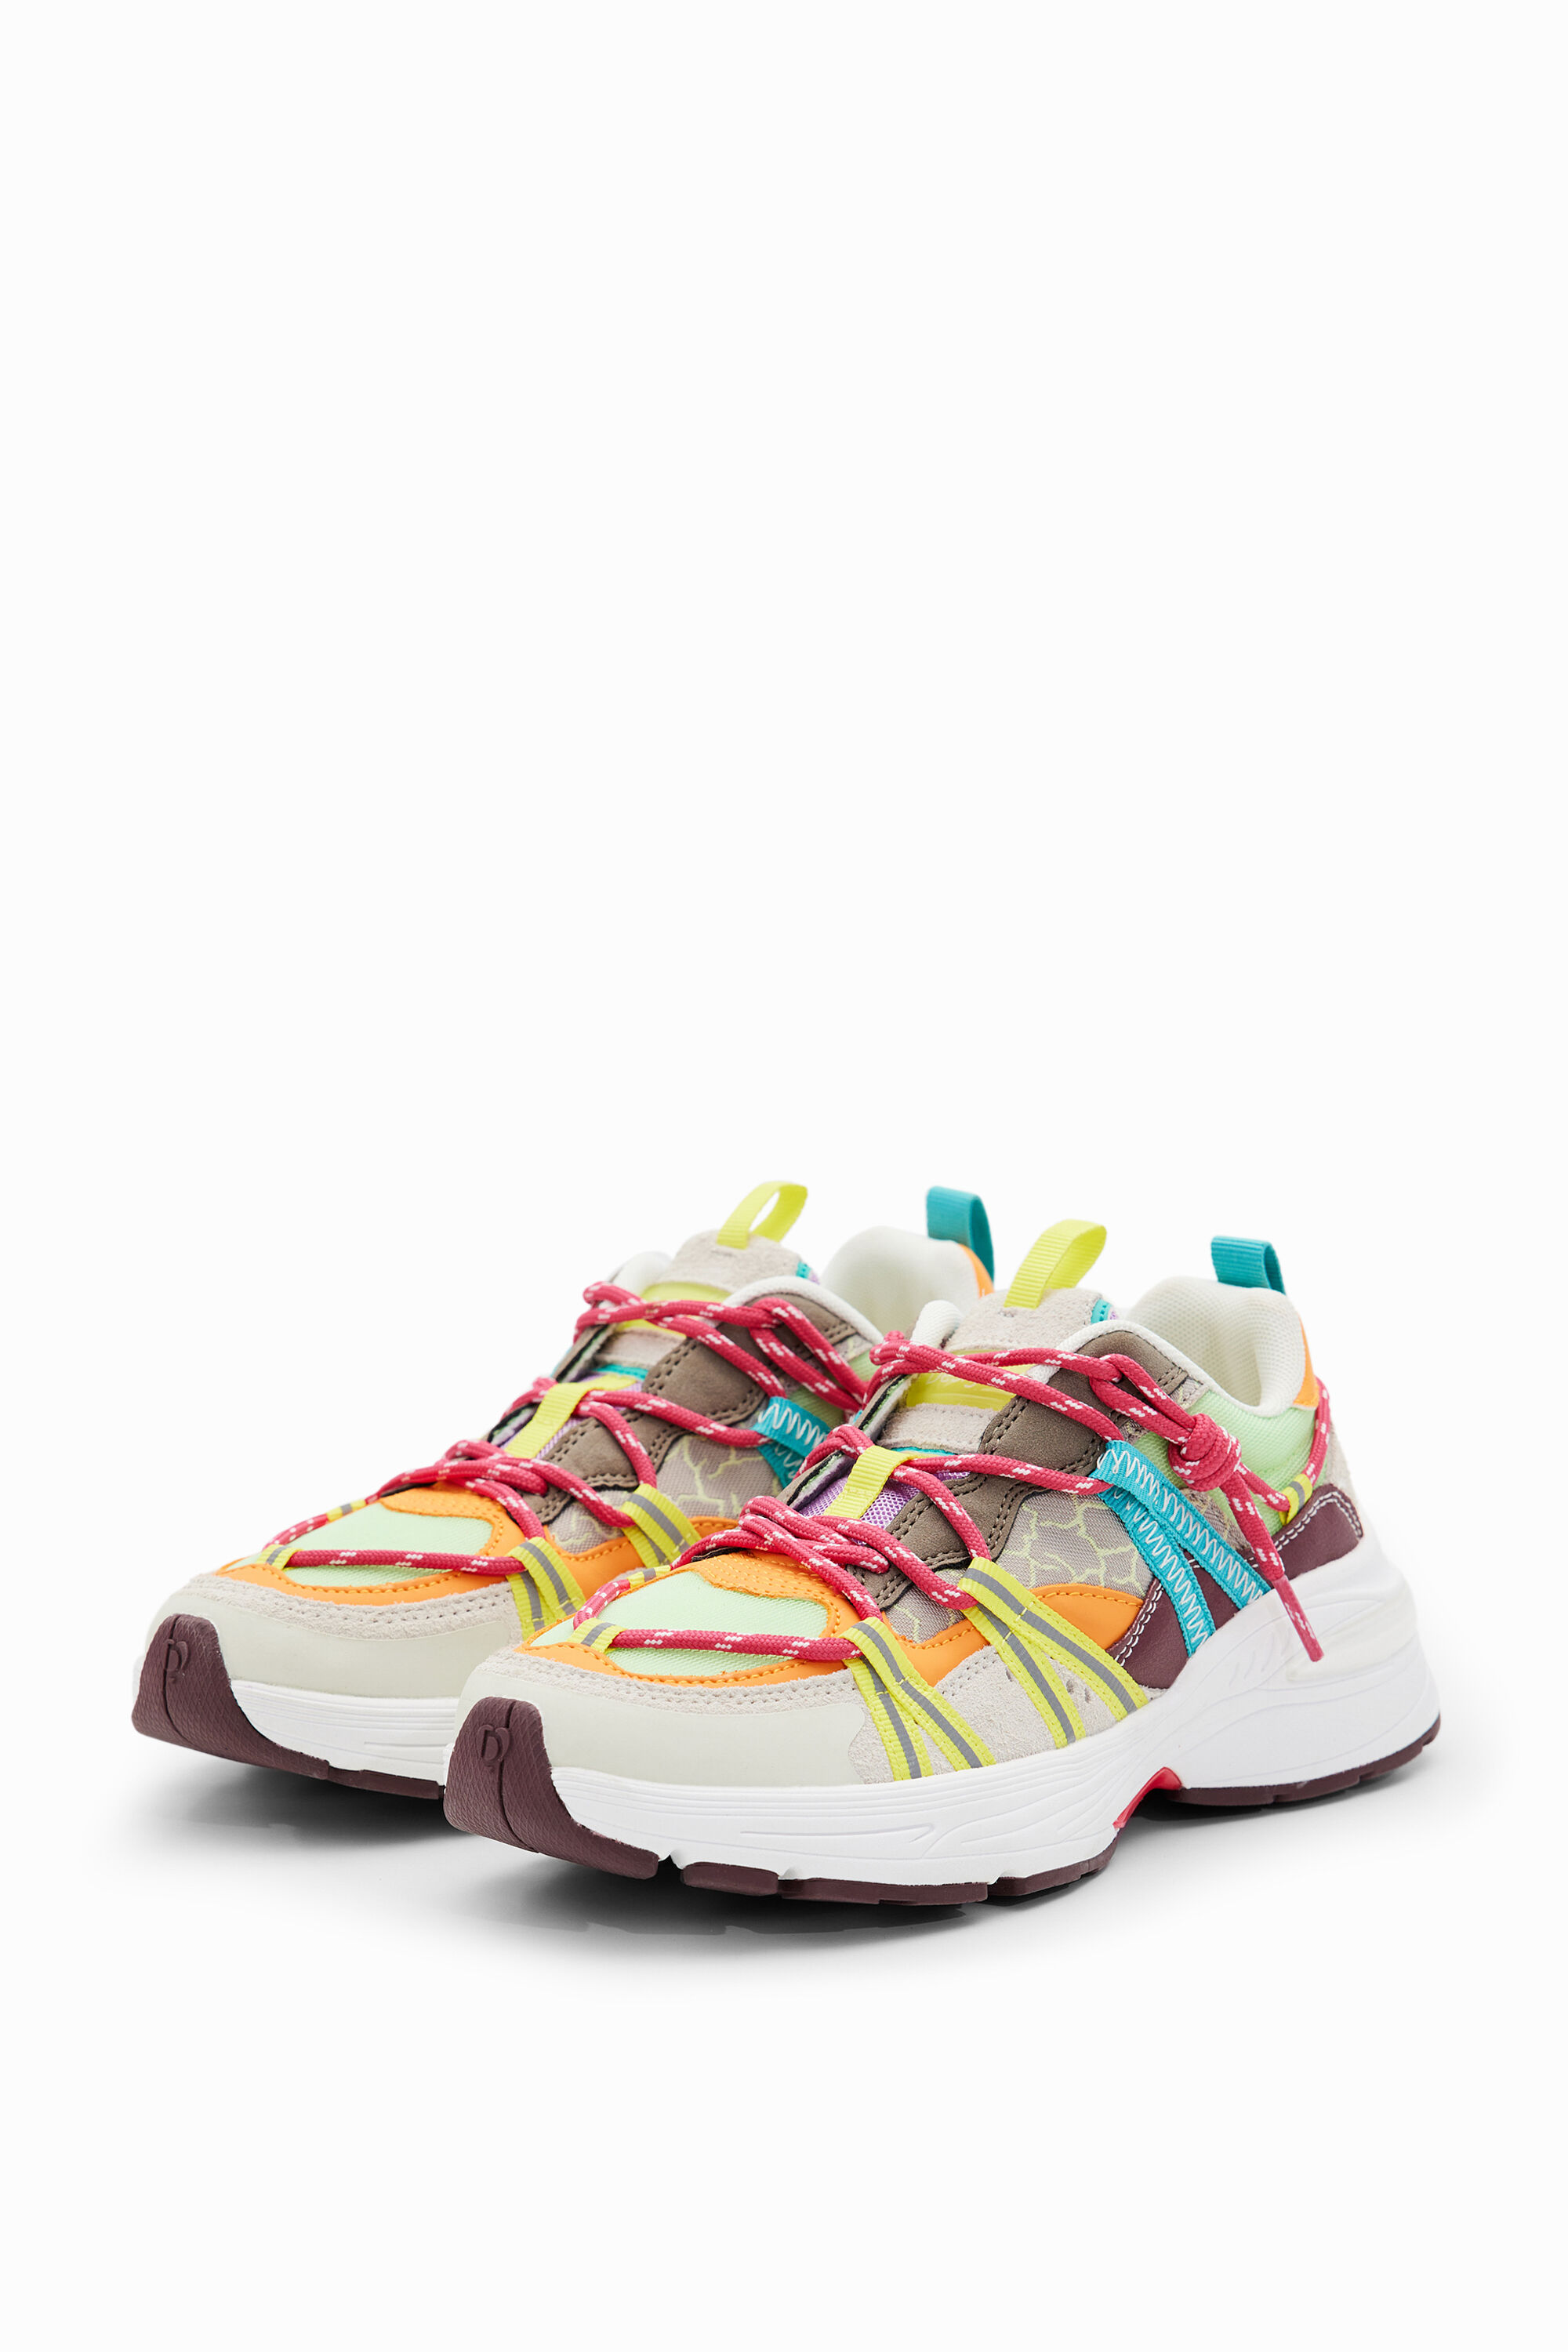 Shop Desigual Trekking Running Sneakers In Material Finishes